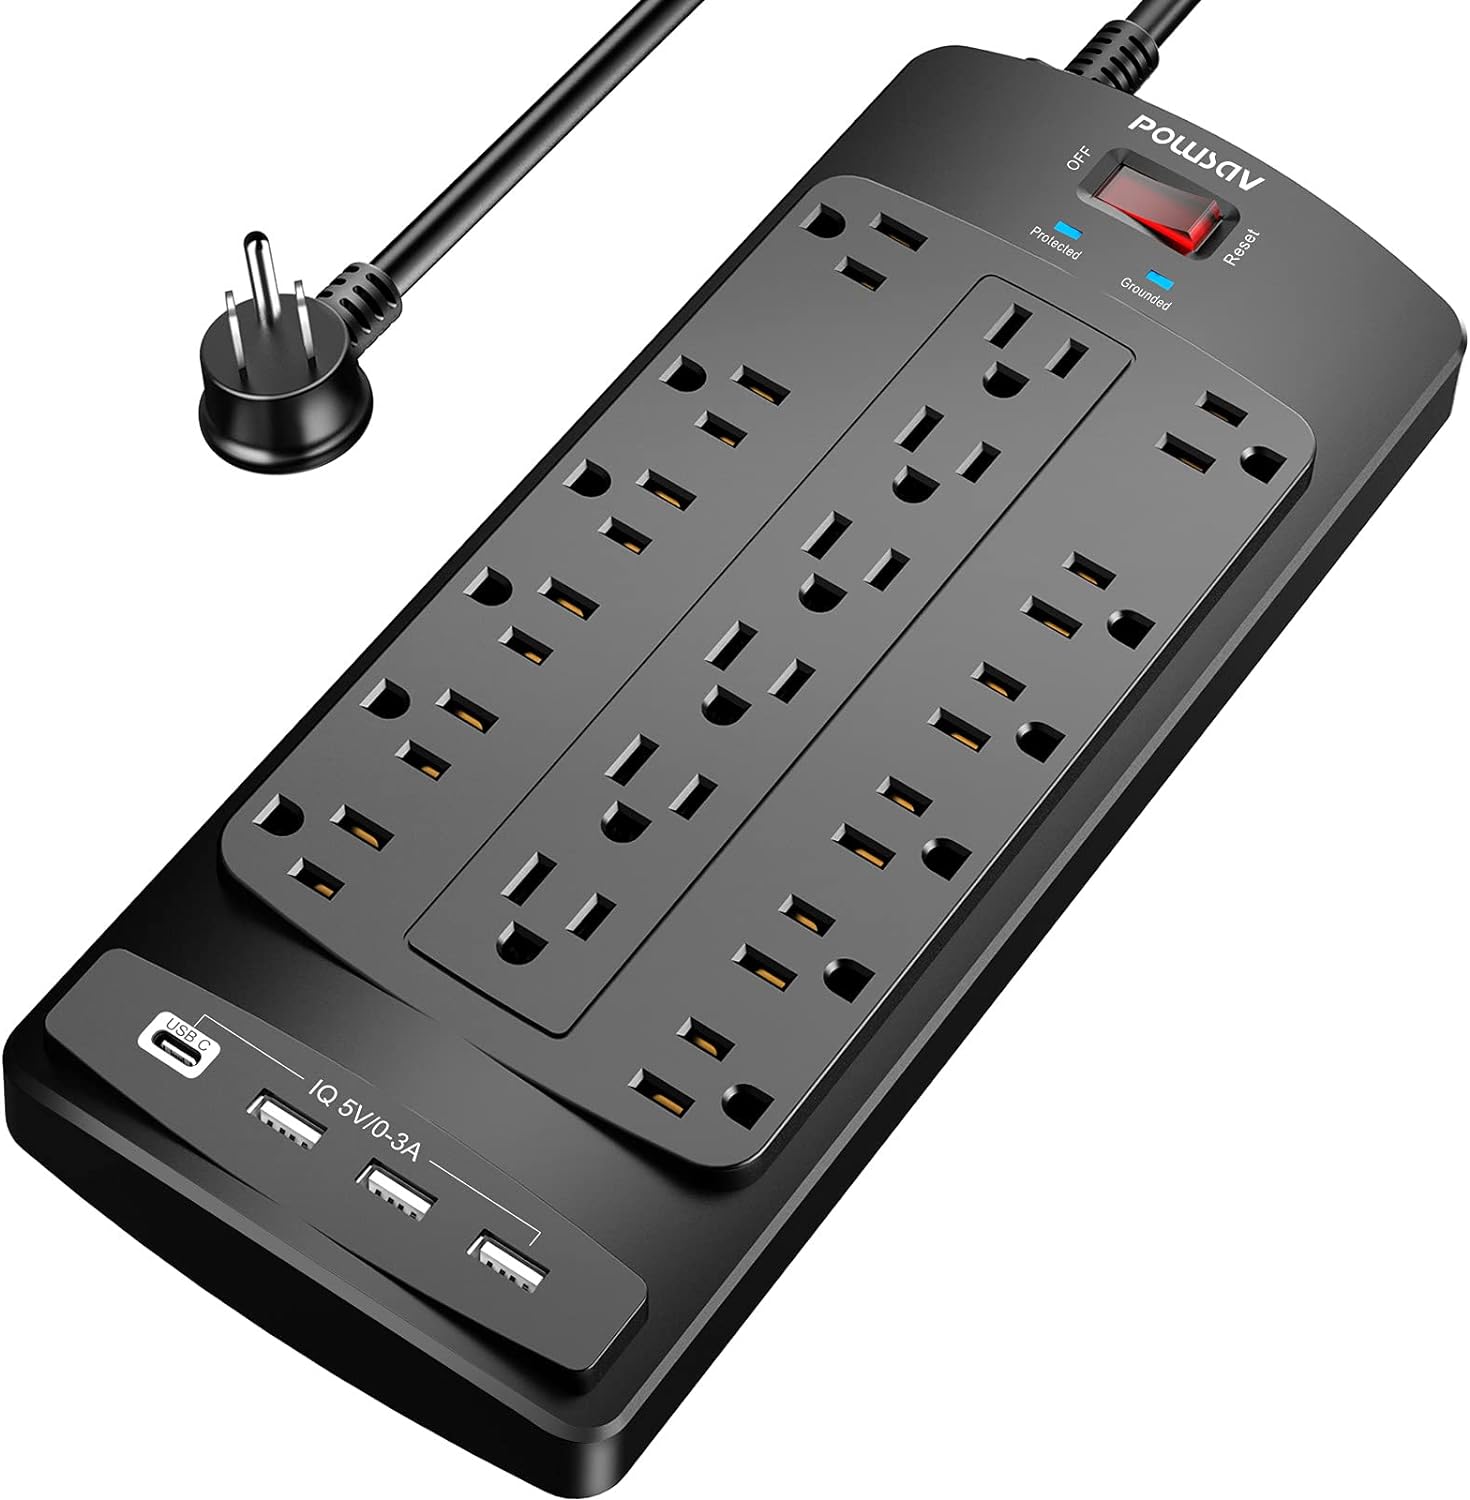 Overall, the 18 Outlets Surge Protector Power Strip with 4 USB Ports is a reliable and efficient solution for powering and protecting your electronic devices. Its combination of ample outlets, USB ports, and surge protection makes it an essential accessory for any tech-savvy individual. If you need a versatile and reliable power hub for your workspace or home office, this power strip is an excellent choice.